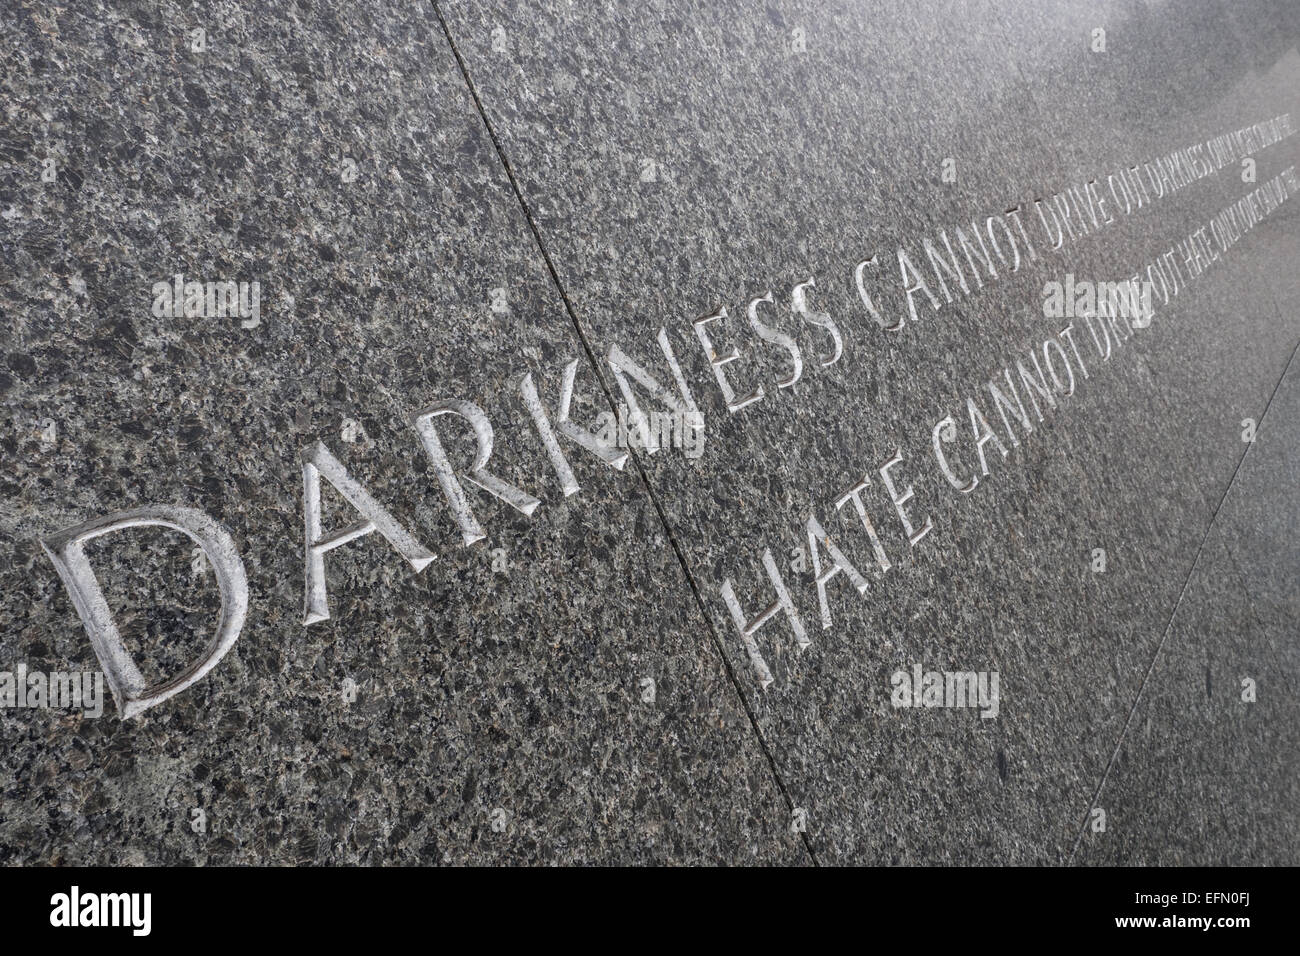 WASHINGTON DC, USA - A quote by Dr. Martin Luther King Jr etched in the marble of the MLK Memorial on the banks of the Tidal Basin in Washington DC. The full quote reads: 'Darkness cannot drive out darkness; only light can do that. Hate cannot drive out hate; only love can do that.' The quote is taken from his 1963 book Strength to Love. Stock Photo